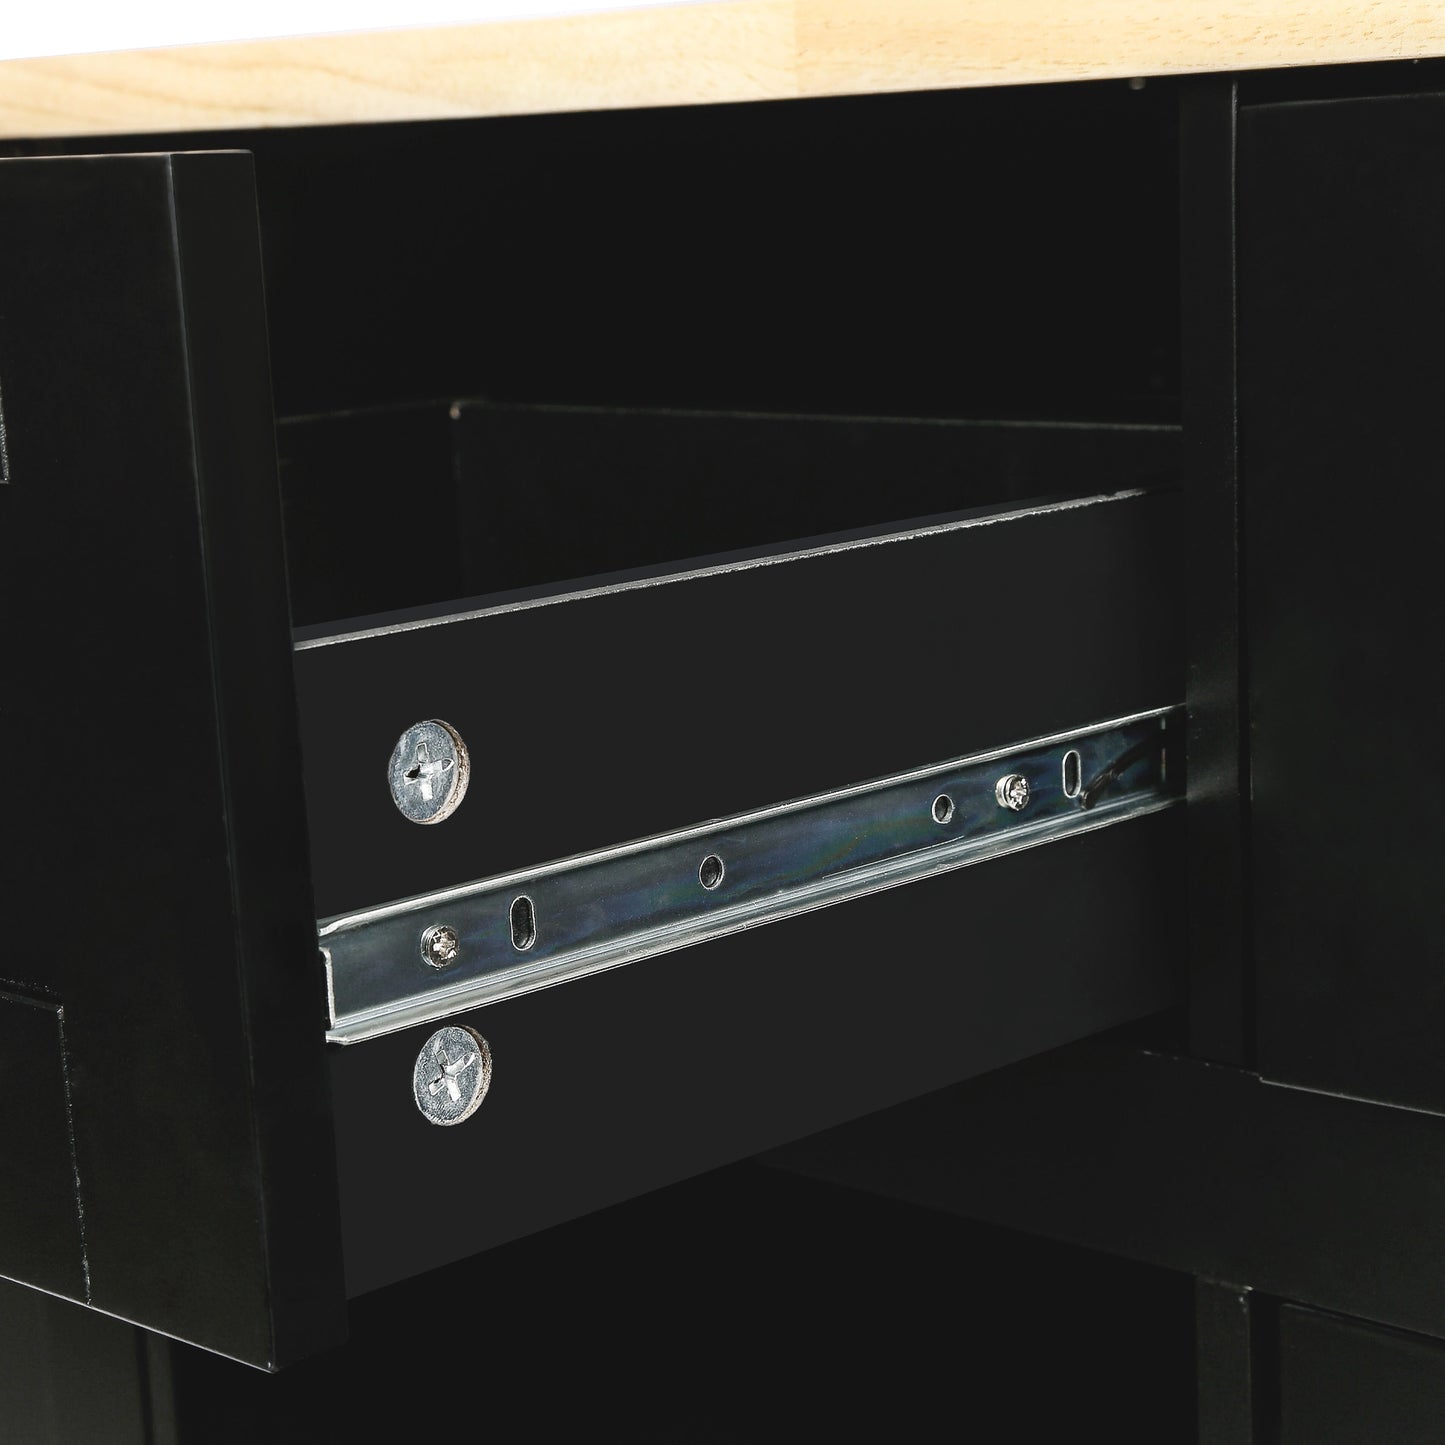 Black Store Kitchen Cart with Storage Cabinet and 3 Drawers